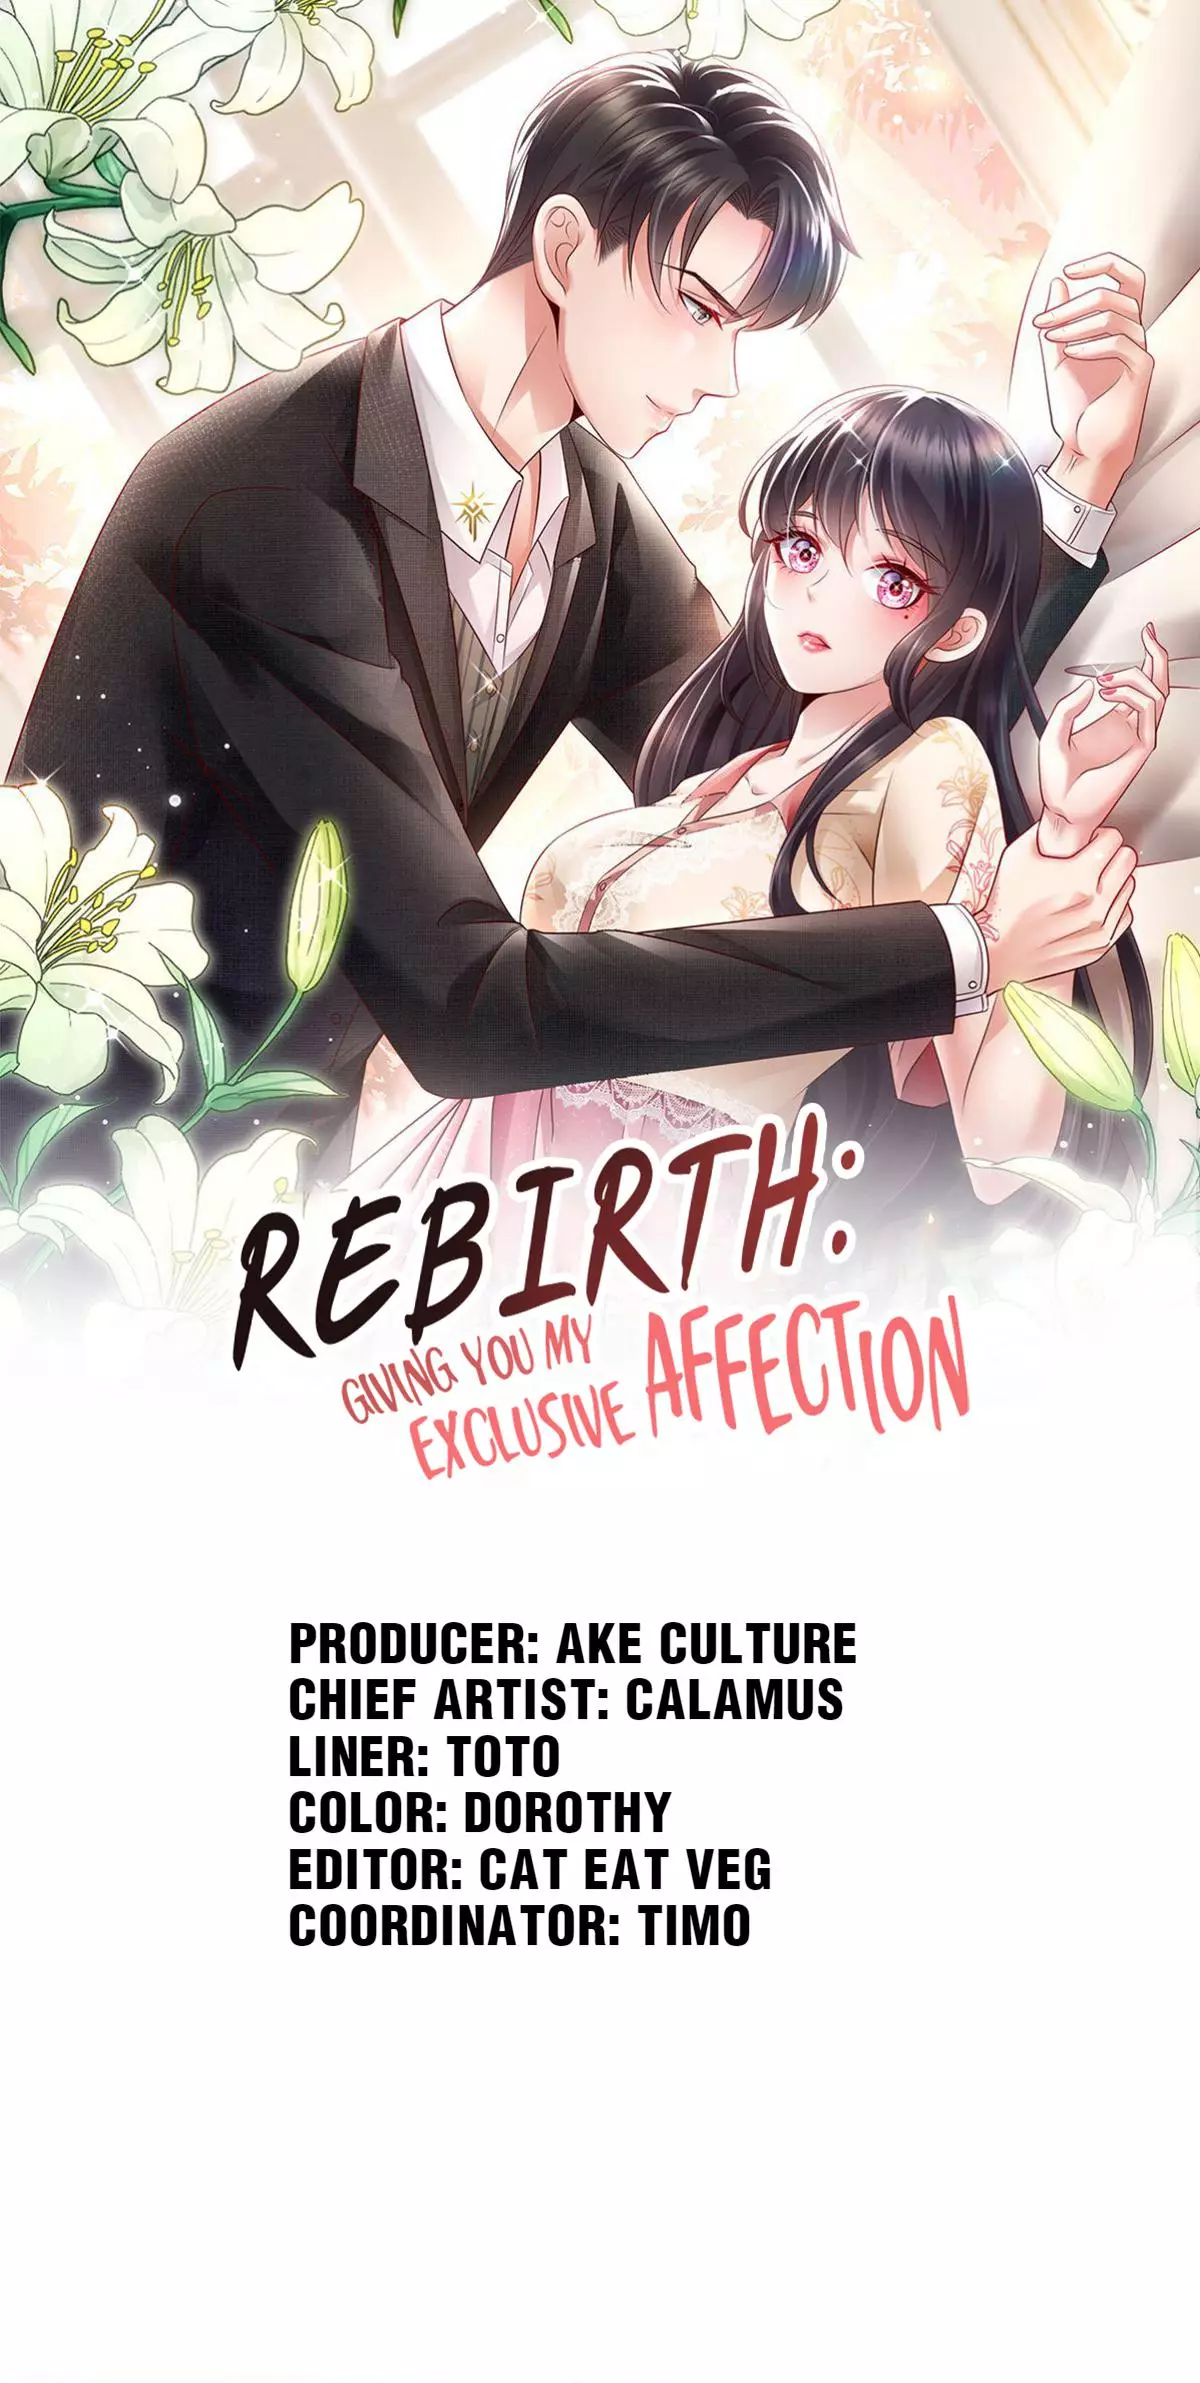 Rebirth: Giving You My Exclusive Affection - 63 page 1-3875c2f3